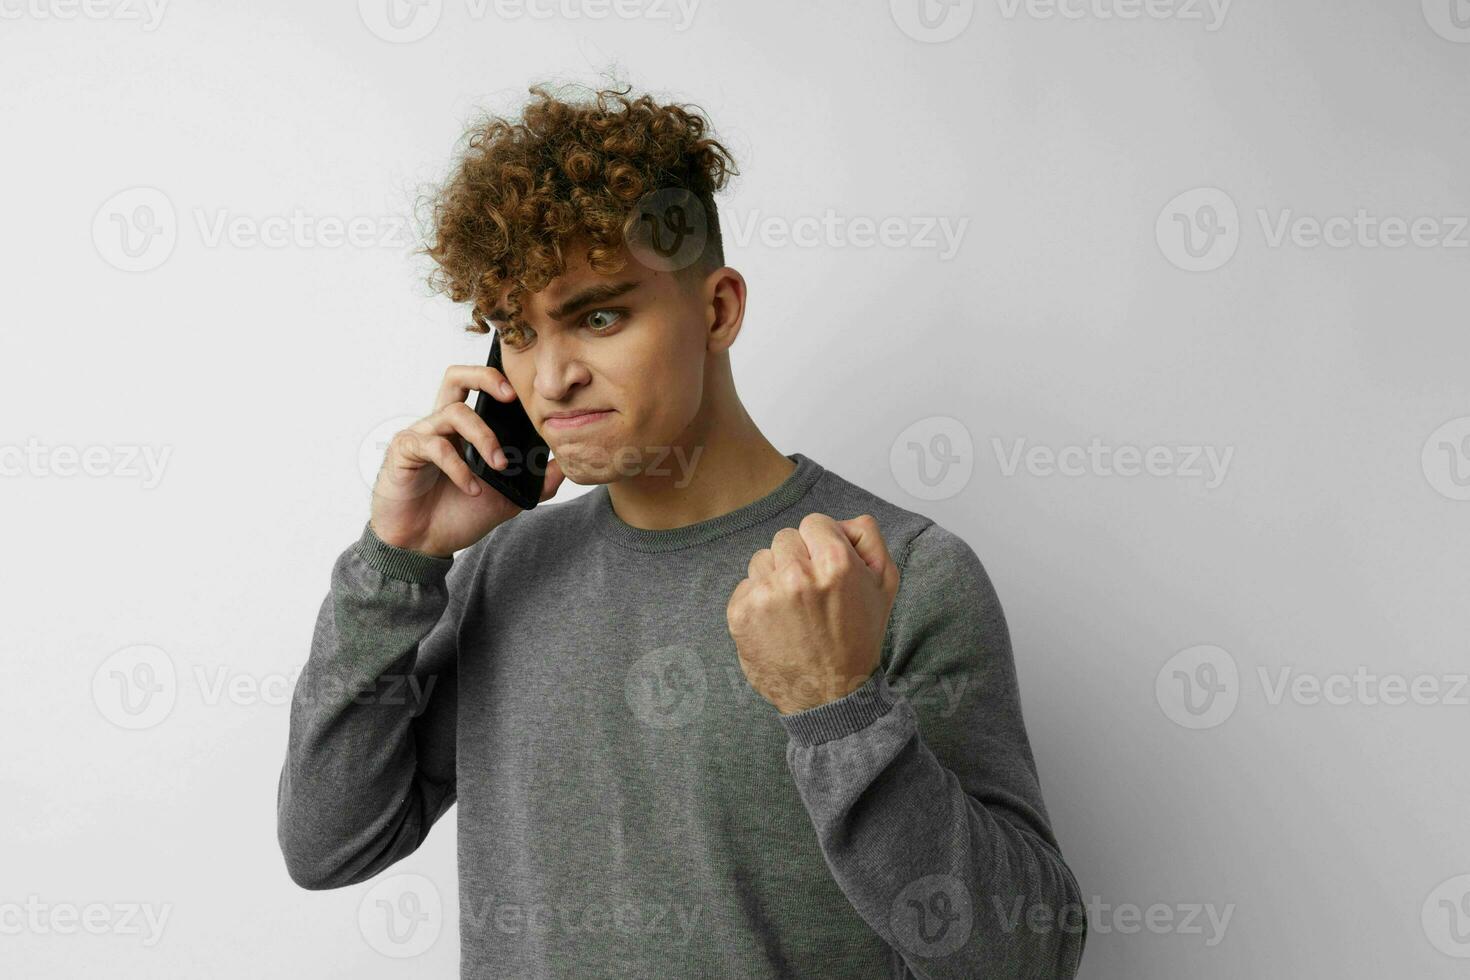 kinky guy with a phone in hand communication isolated background photo